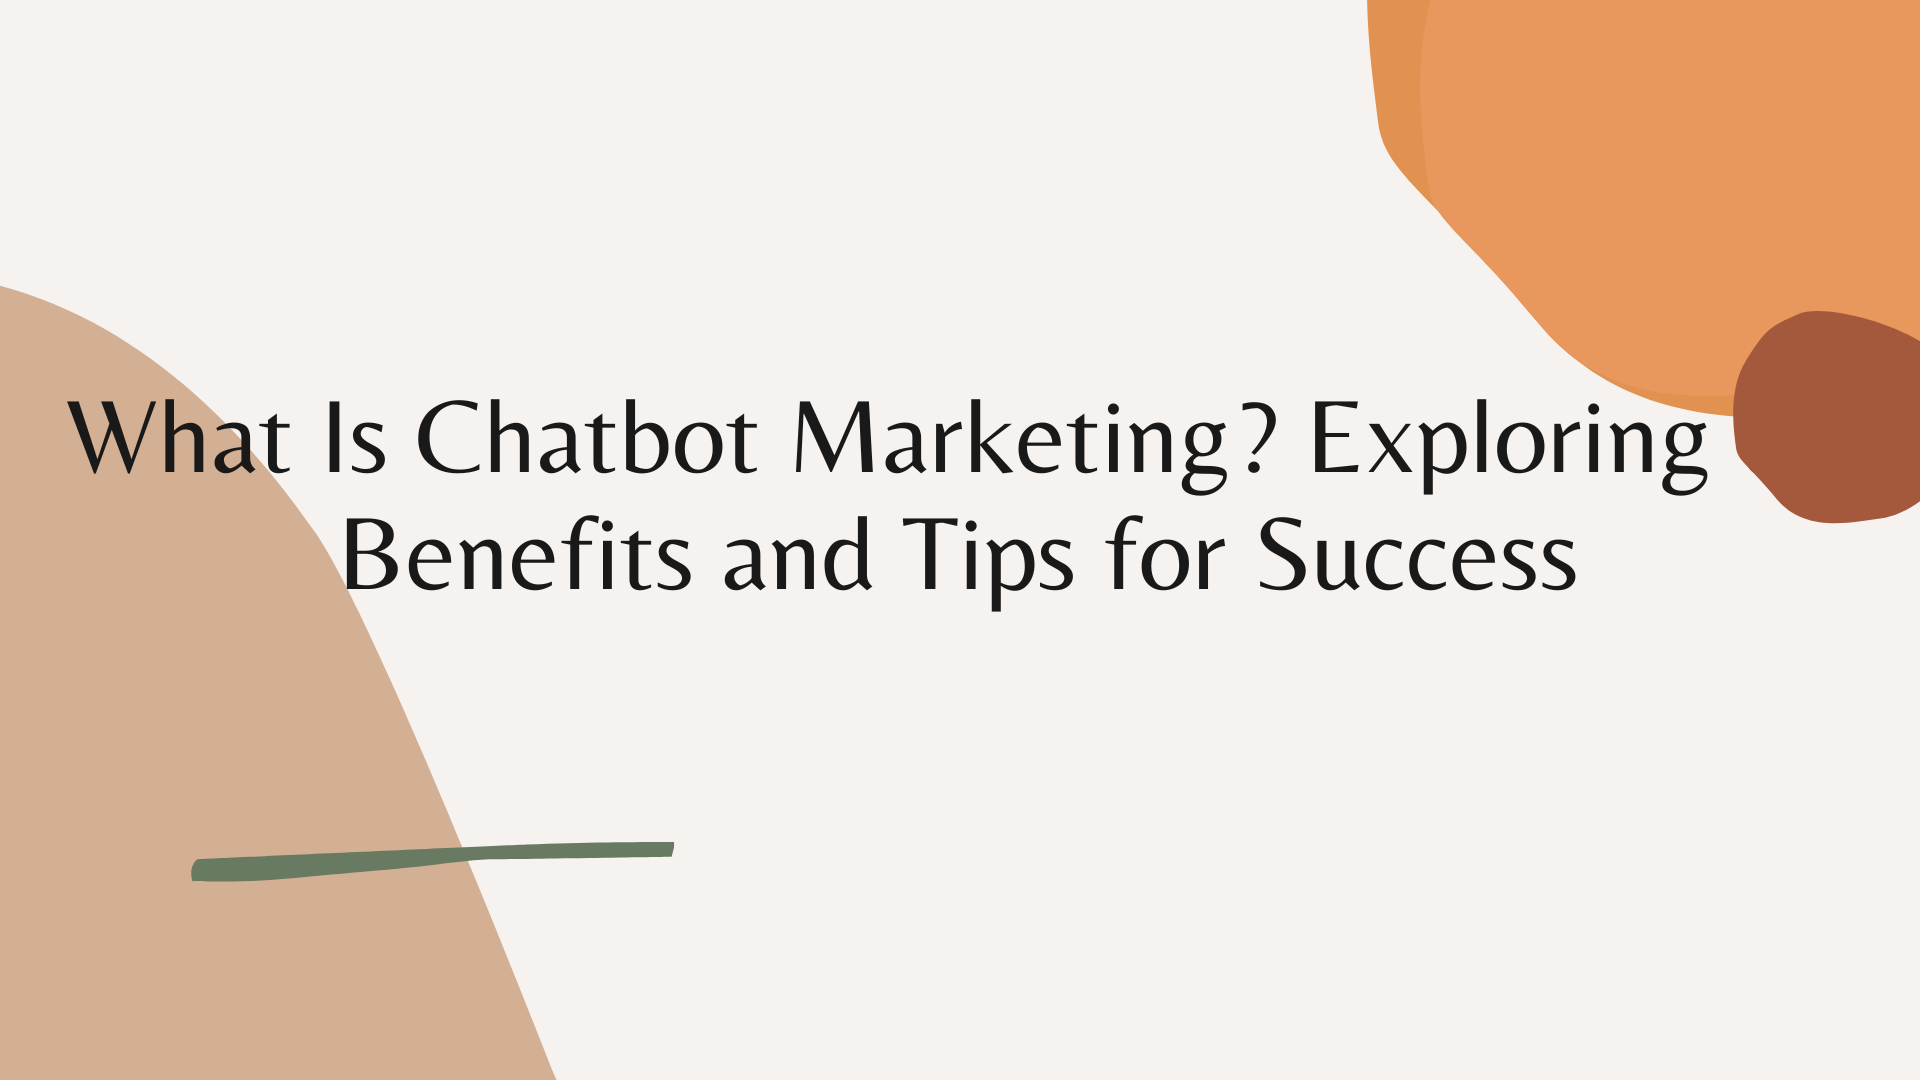 What Is Chatbot Marketing? Exploring the Benefits and Tips for Success